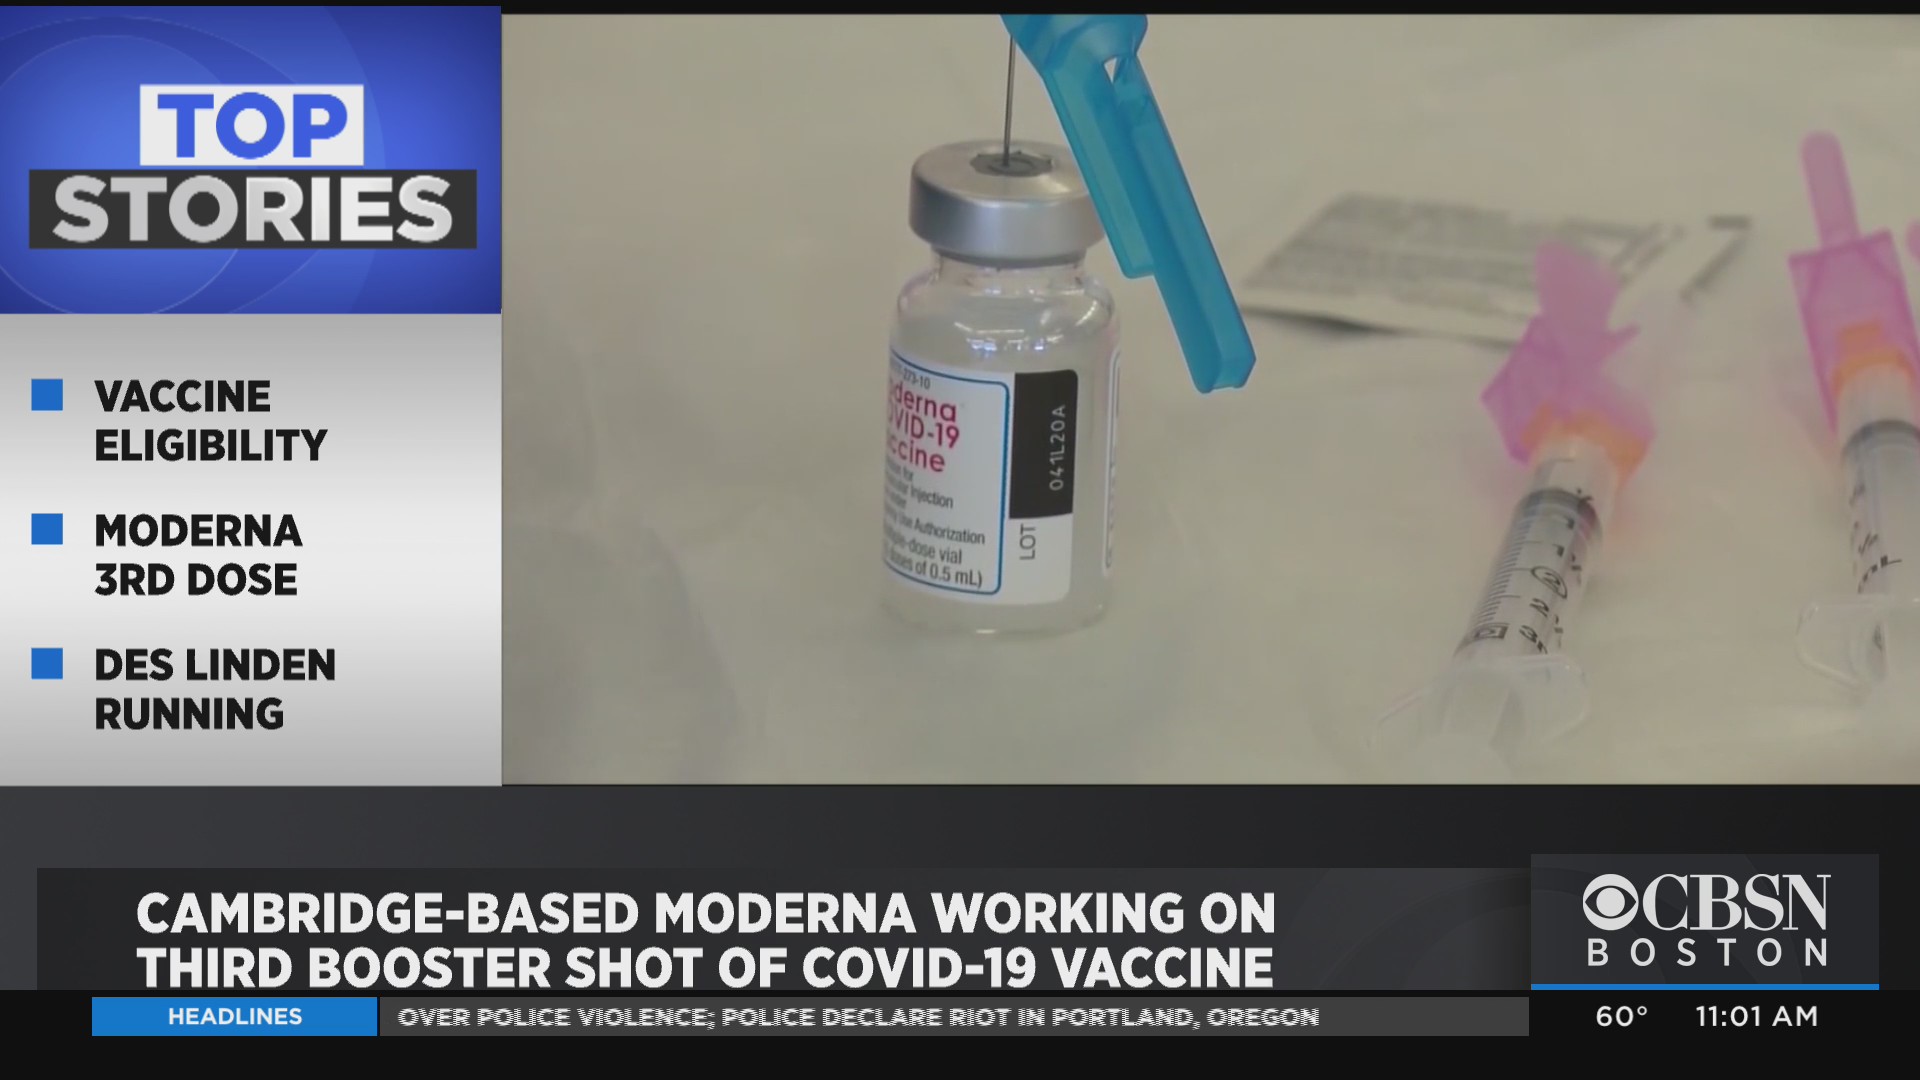 what is in the covid vaccine booster